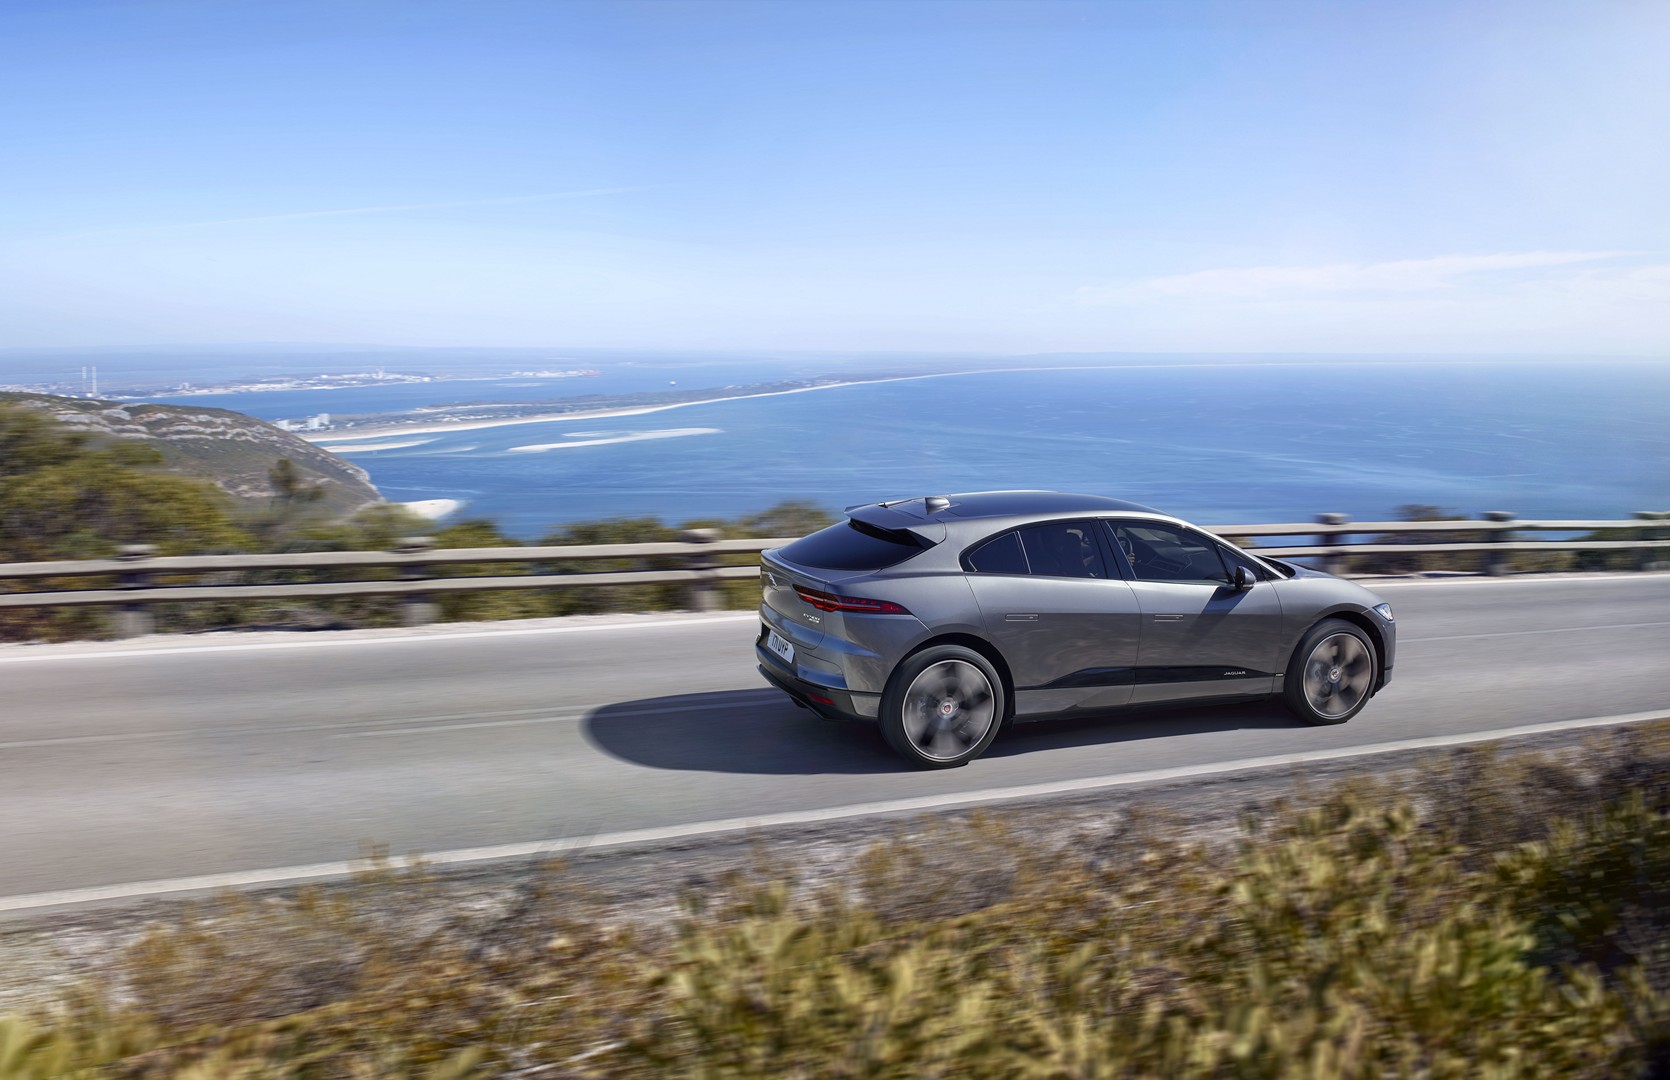 https://s1.cdn.autoevolution.com/images/news/gallery/2020-jaguar-i-pace-update-offers-234-miles-of-range-thanks-to-etrophy-know-how_53.jpg